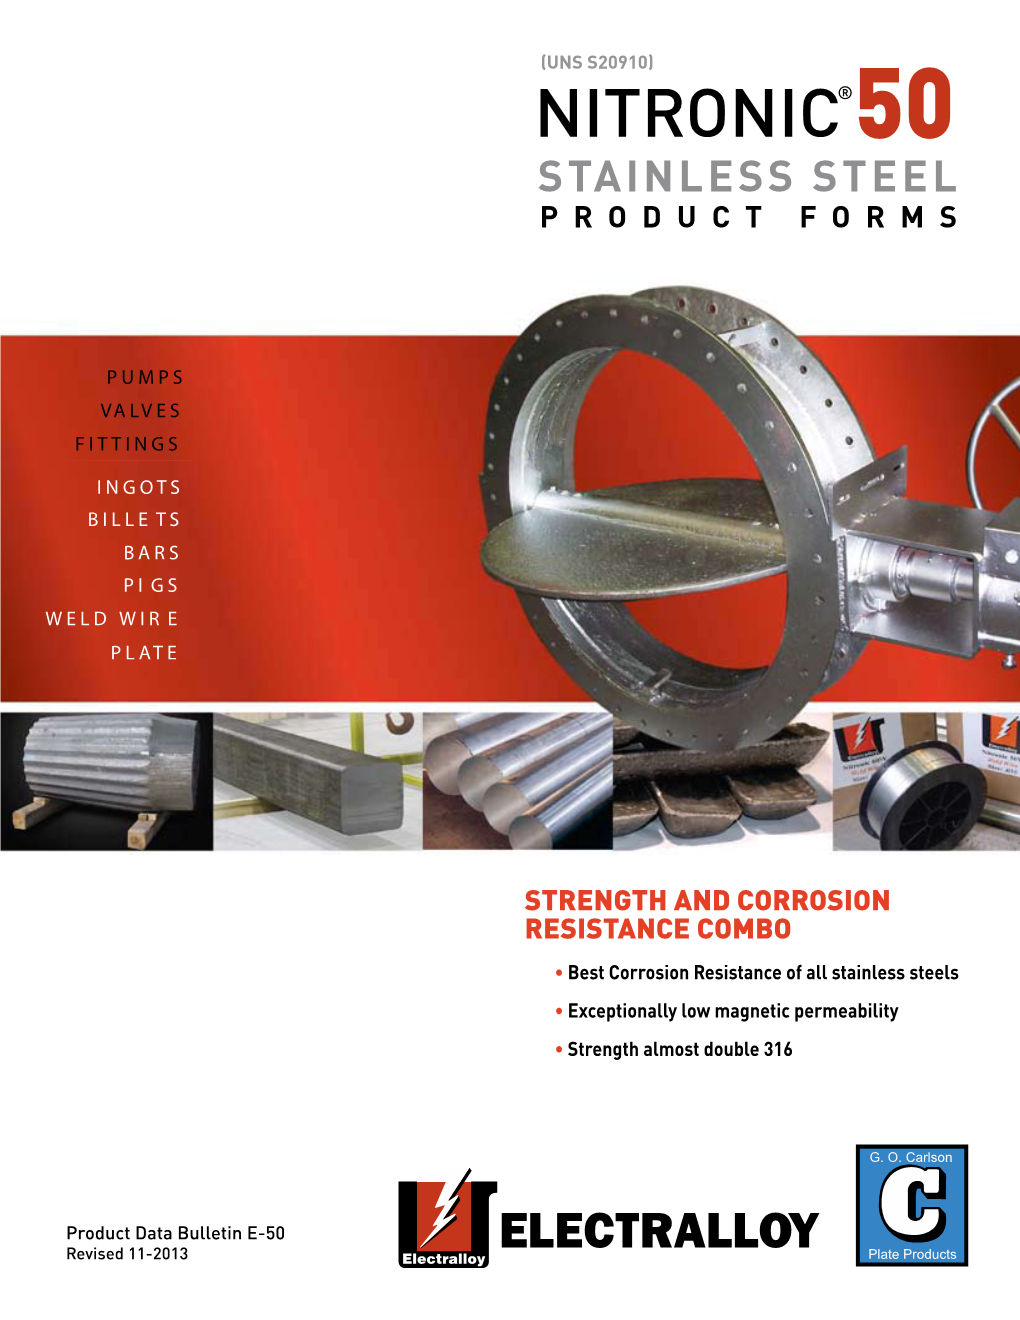 Nitronic ® 50 Stainless Steel